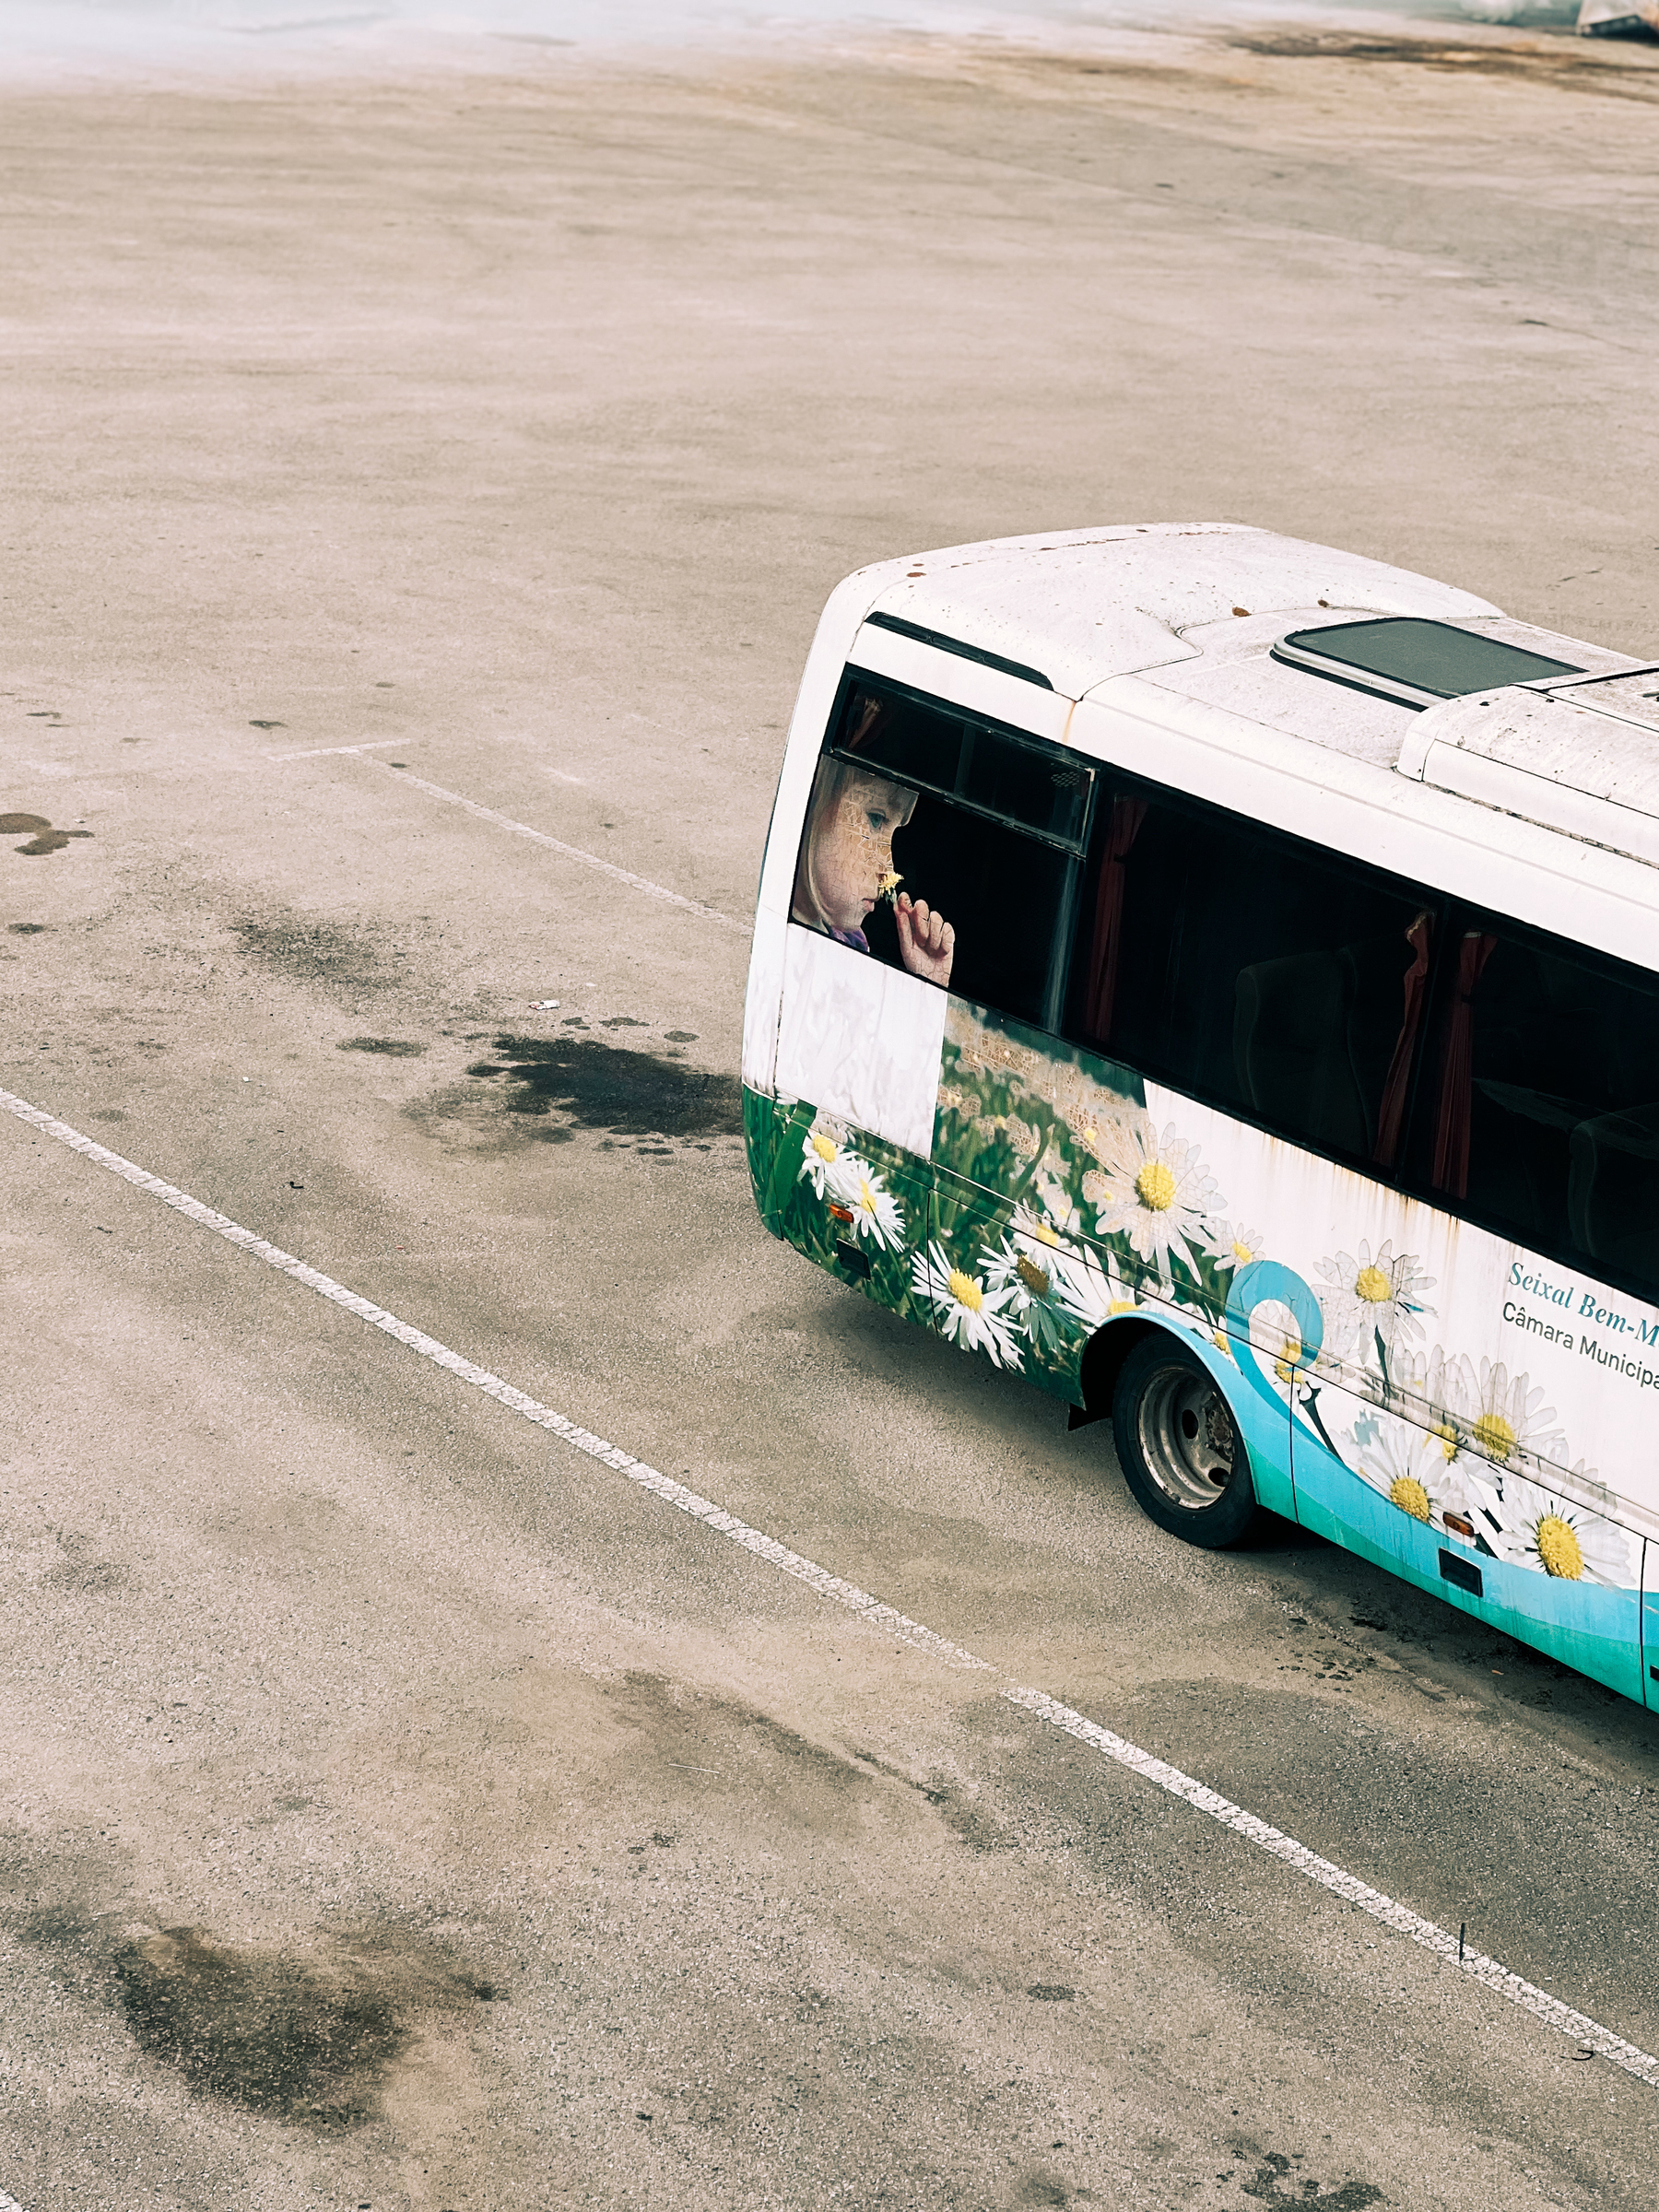 A person looking out from a partially visible bus with a floral design, parked on an expanse of tarmac with visible road markings.